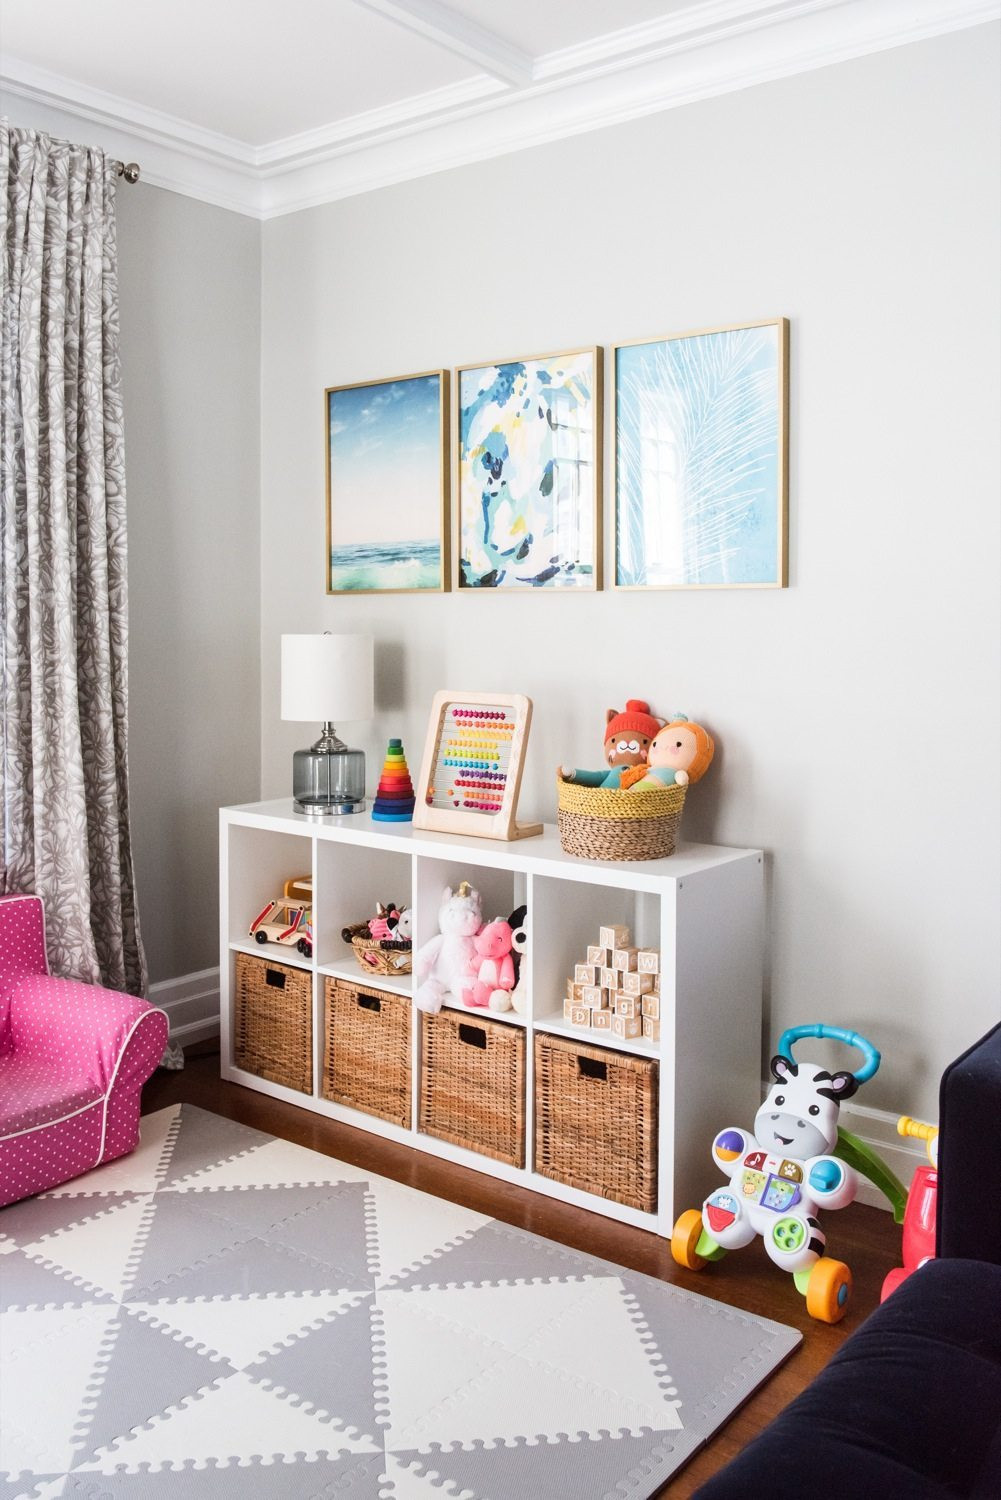 Kids Playroom Design
 Emerson s Modern Playroom Tour The Sweetest Occasion